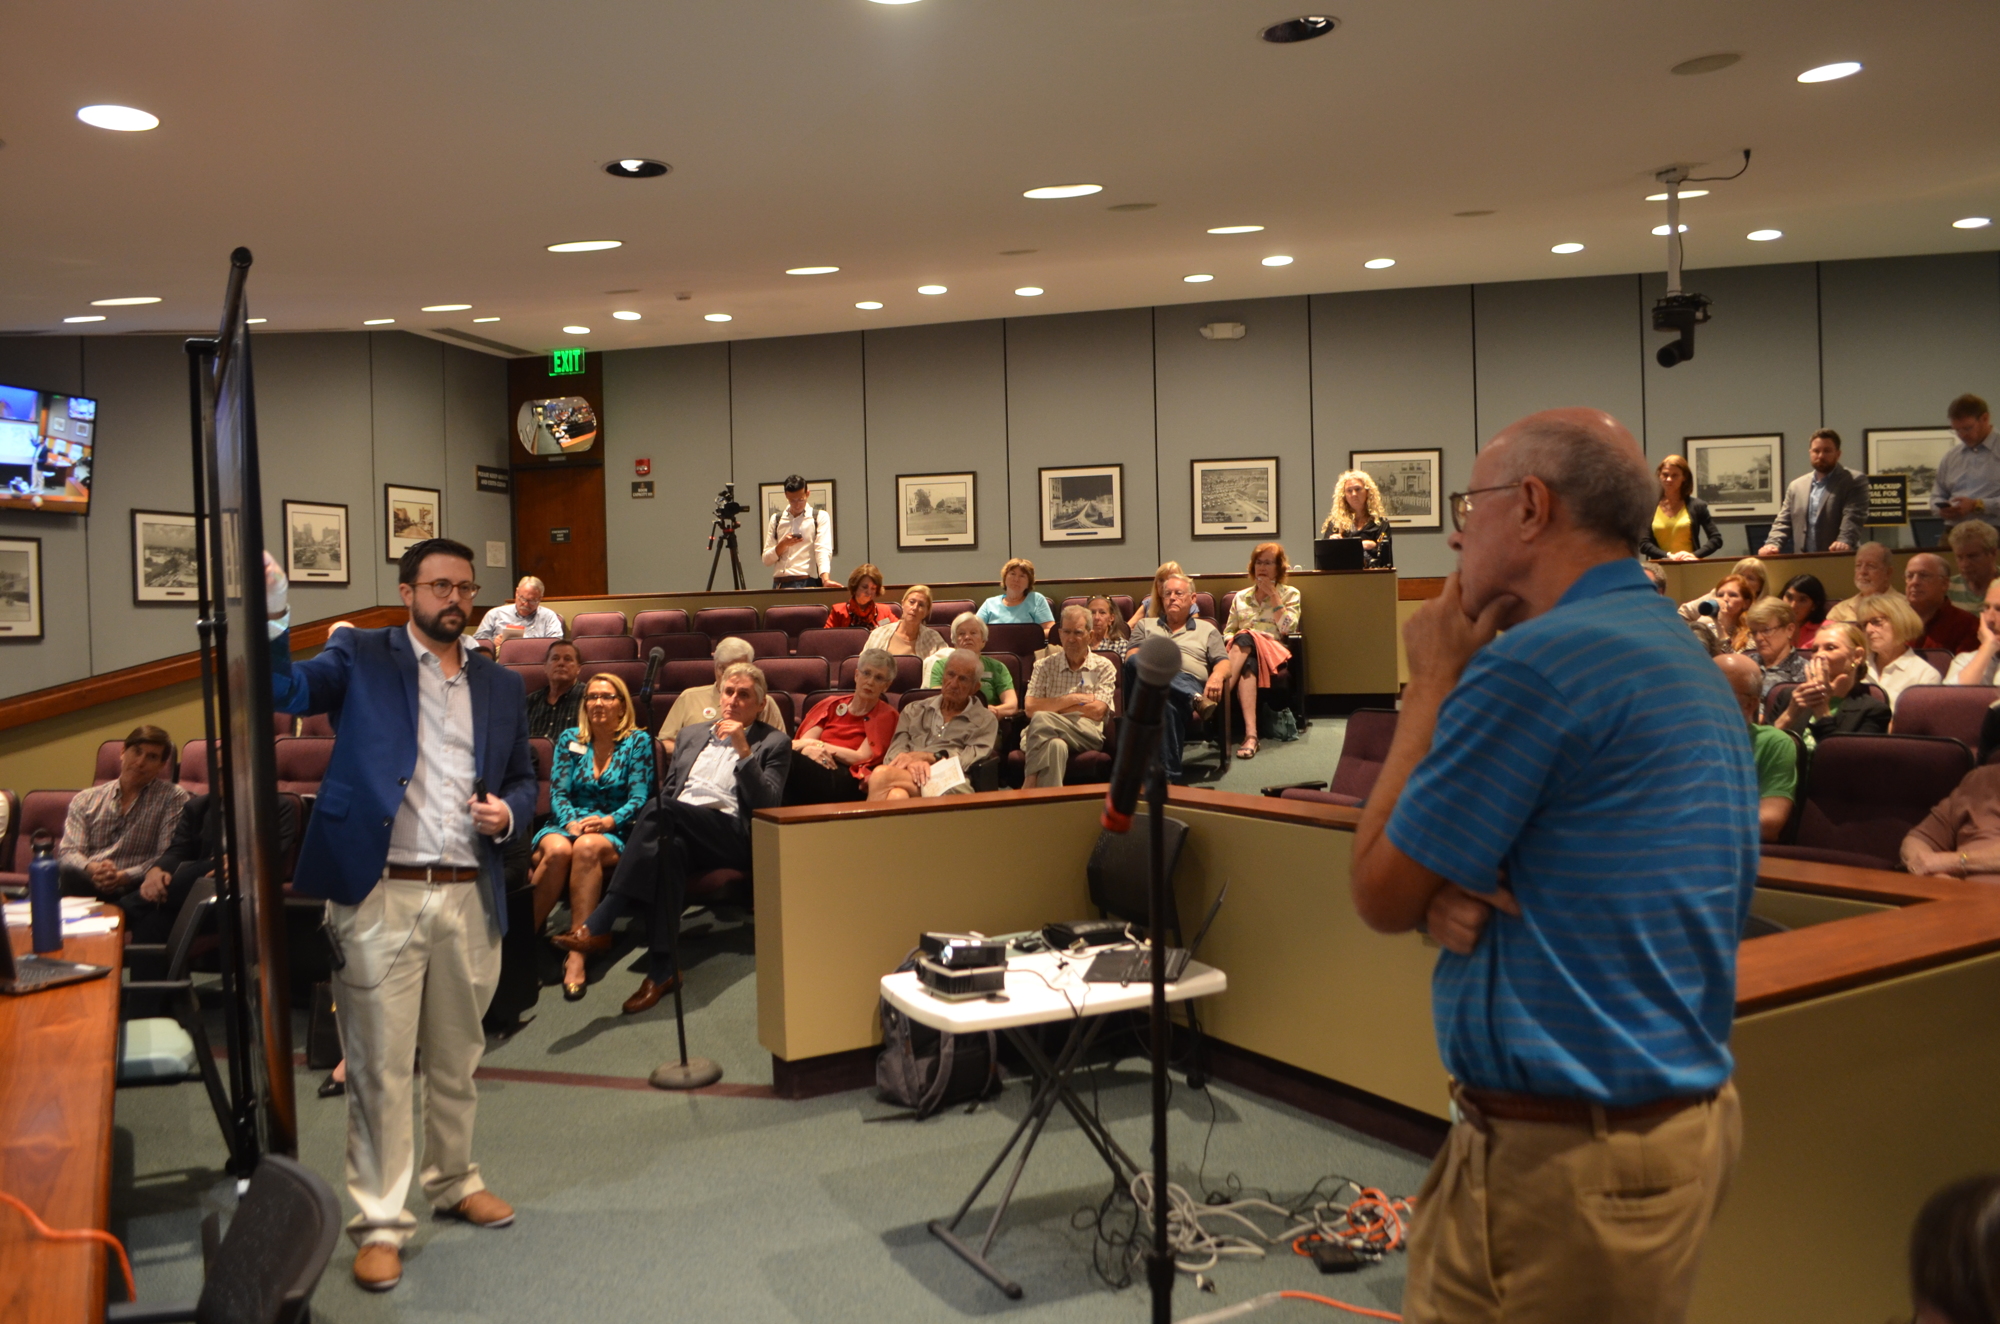 Chris Cianfaglione, left, addresses a speaker's question about traffic gridlock and circulation at a community workshop at City Hall on Wednesday, Jan. 15.